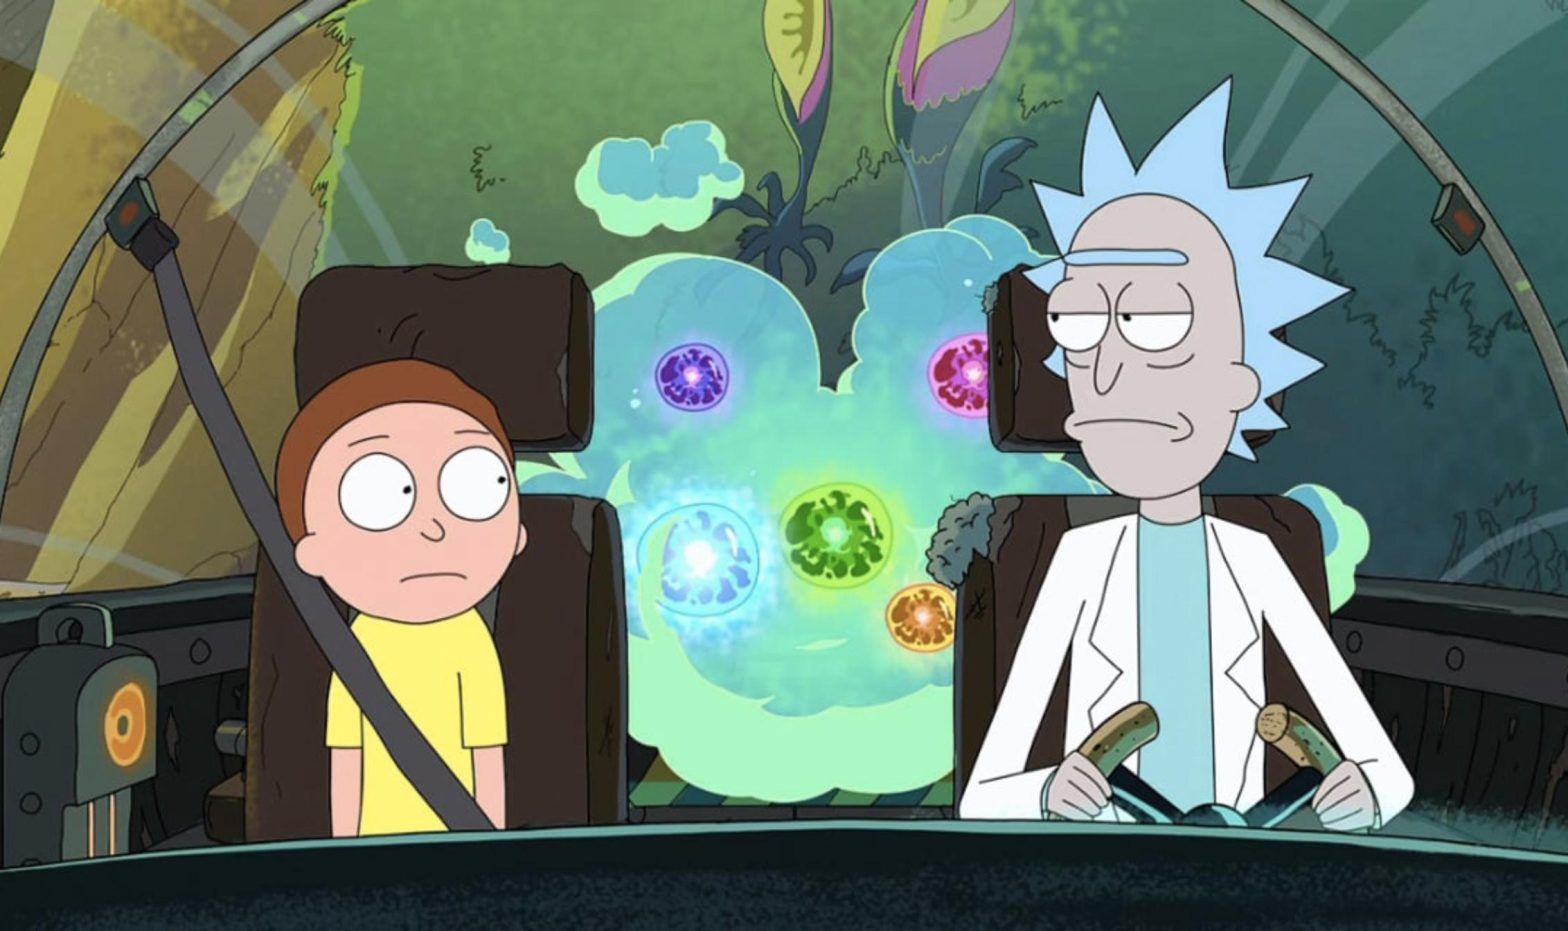 Rick and Morty may get canceled